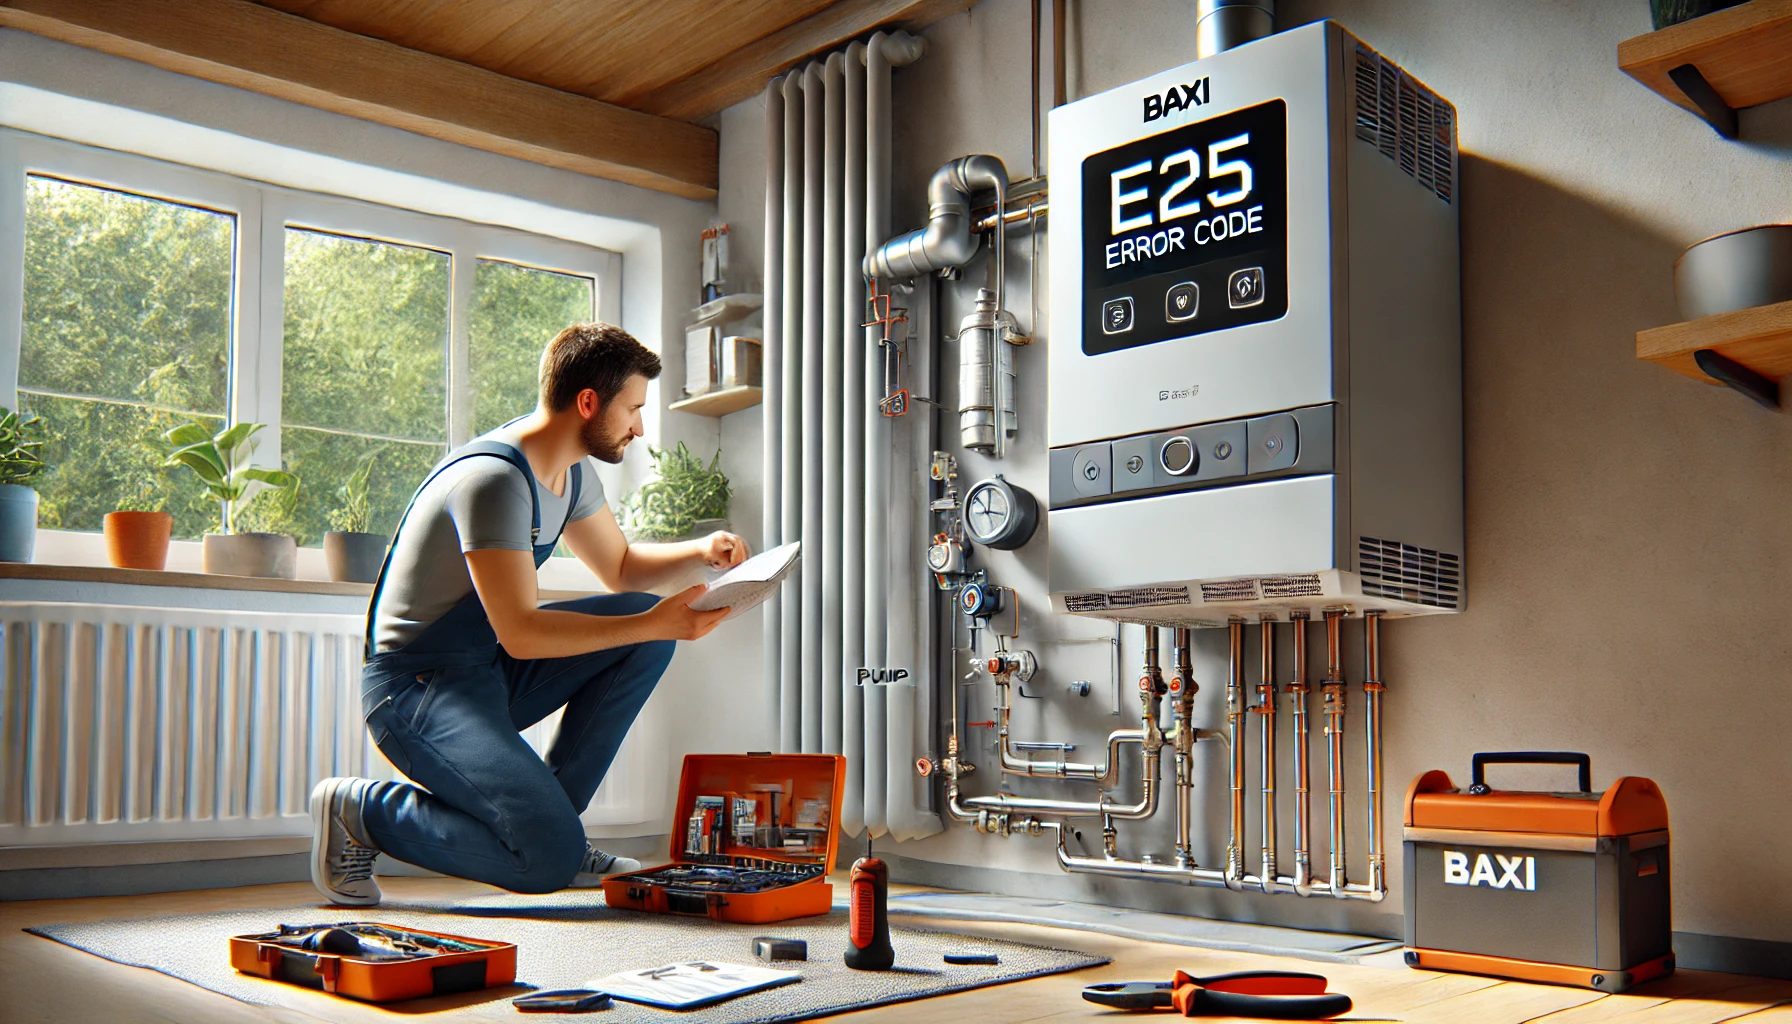 Ultimate Guide to Troubleshooting and Fixing Baxi E25 Error Code